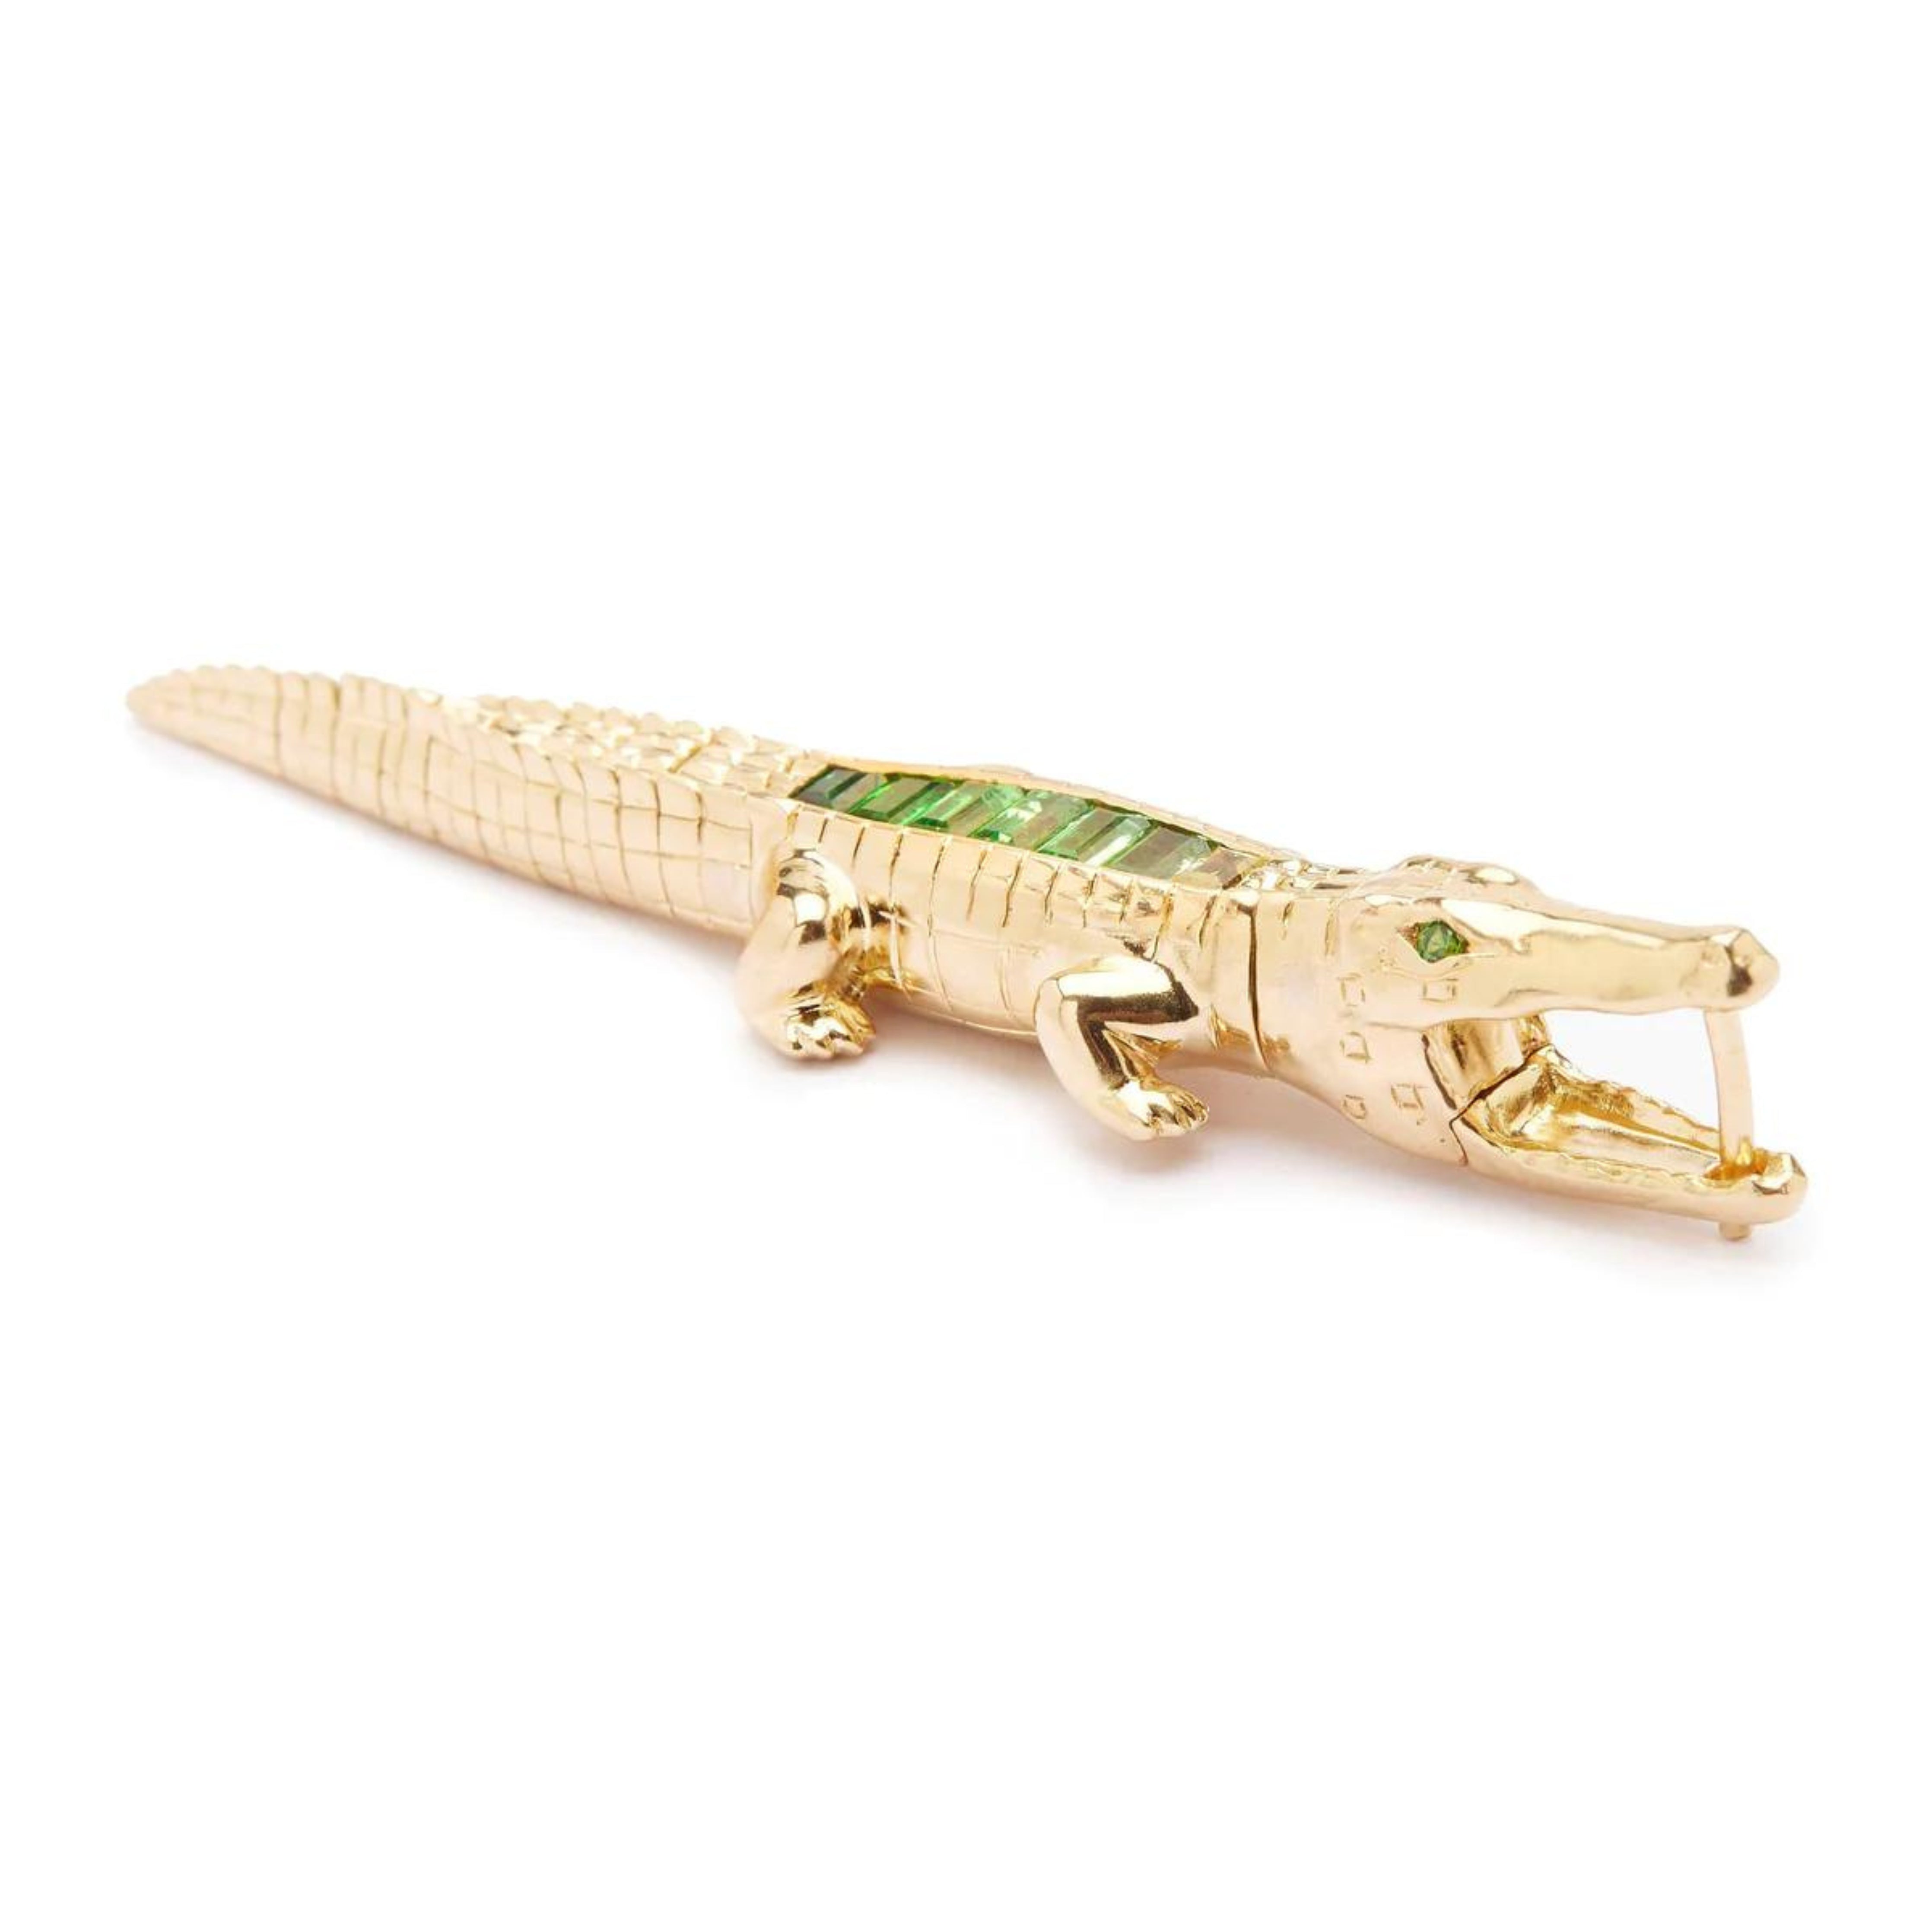 Bibi ven der Velden, Tsavorite Alligator Ear Bite Earring  Crafted in 18K yellow gold and featuring an arrangement of green tsavorites, the intricately carved design replicates an alligator&#39;s body. Shown from the side.